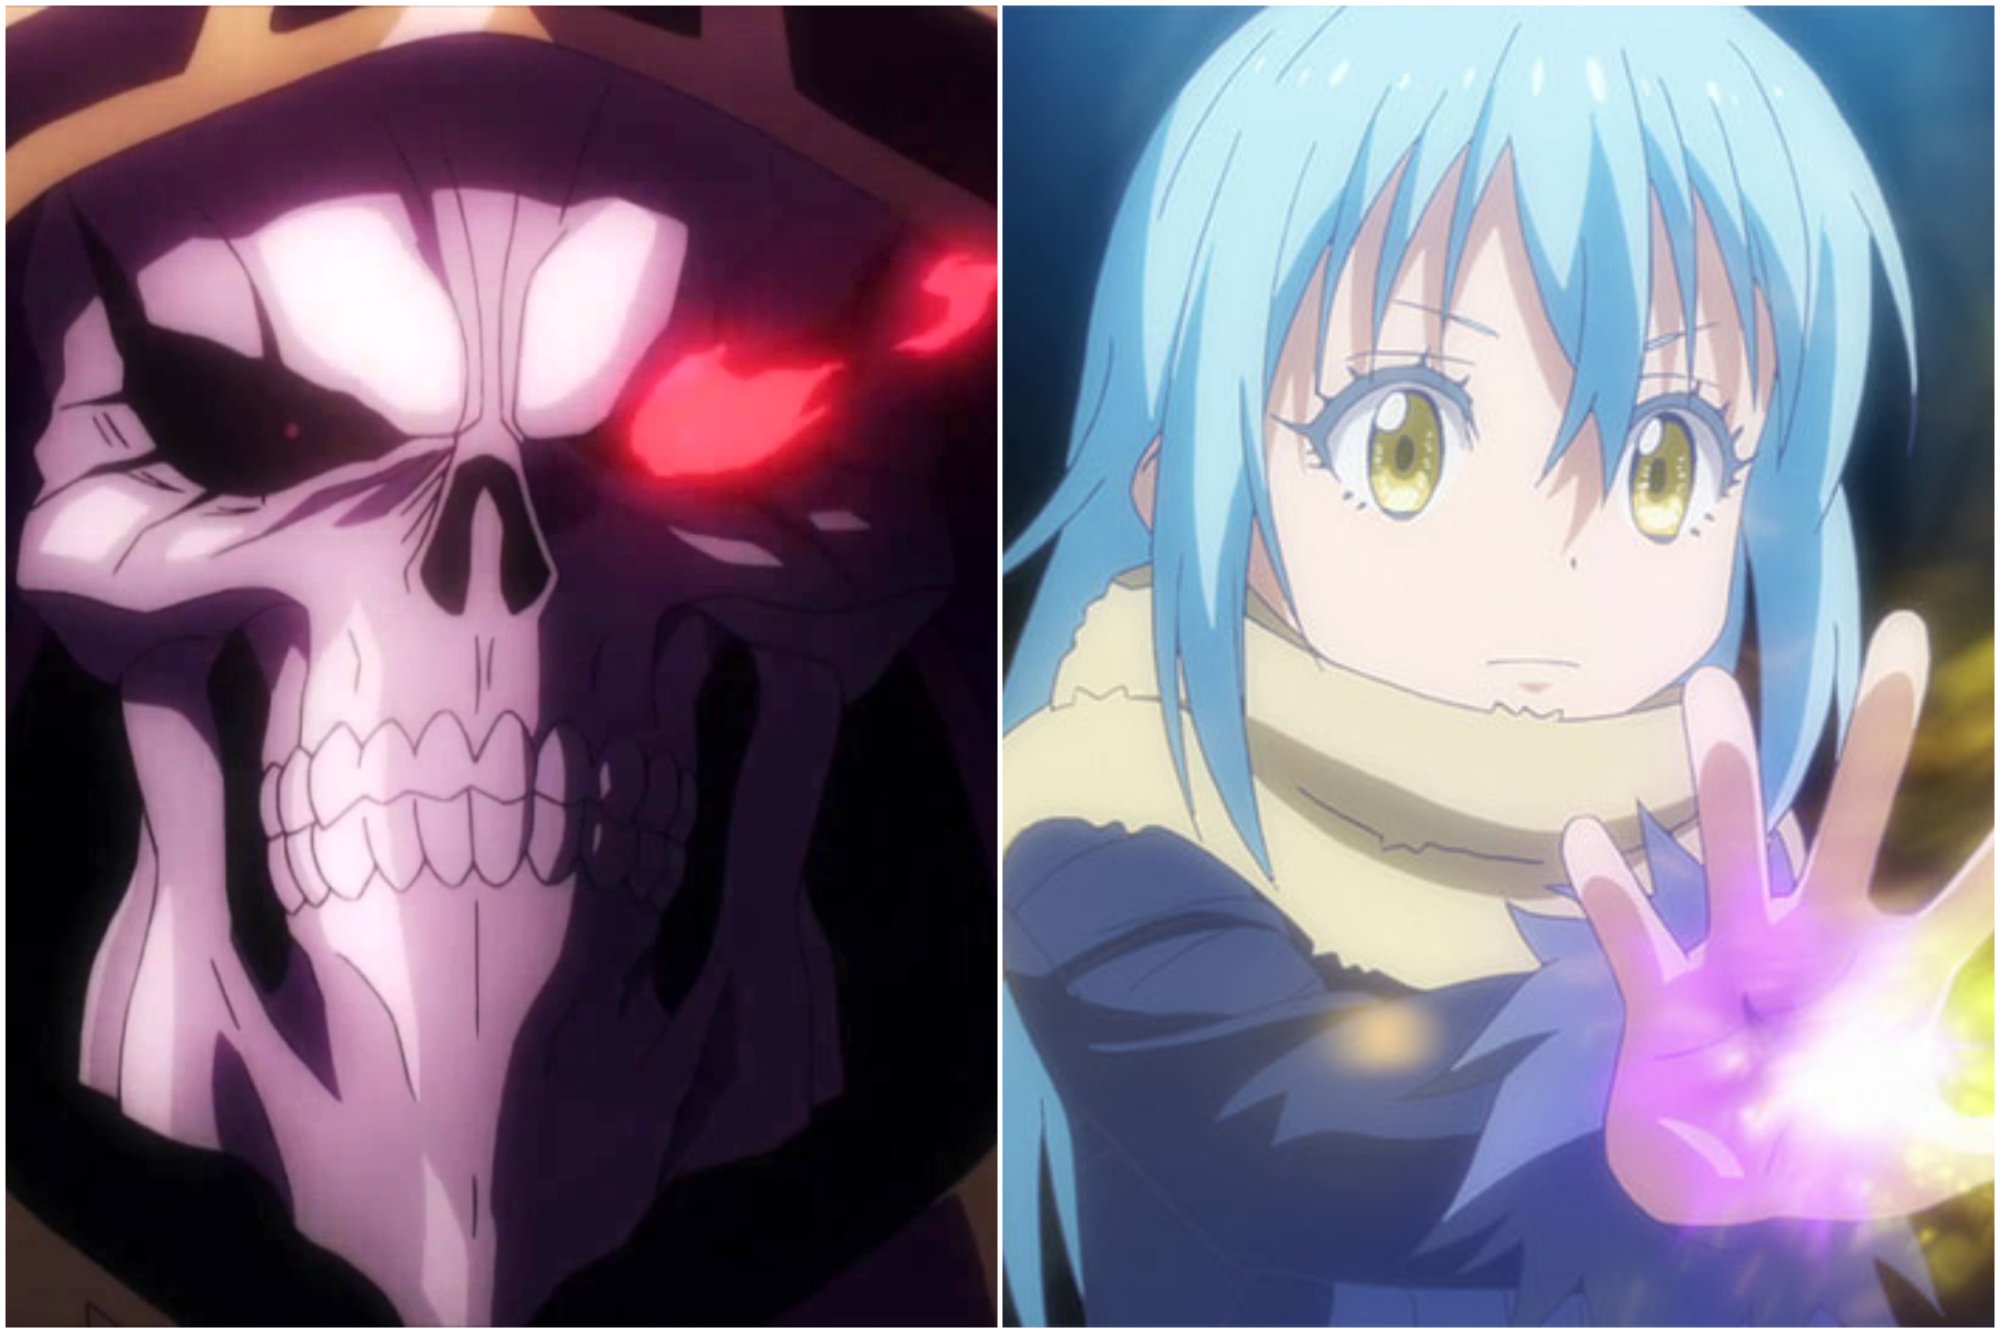 'Overlord' Ainz Ooal Gown and 'That Time I Got Reincarnated as a Slime' Rimuru Tempest. Ainz with one glowing red eye. Rimuru holding out his hand with magic coming from it.